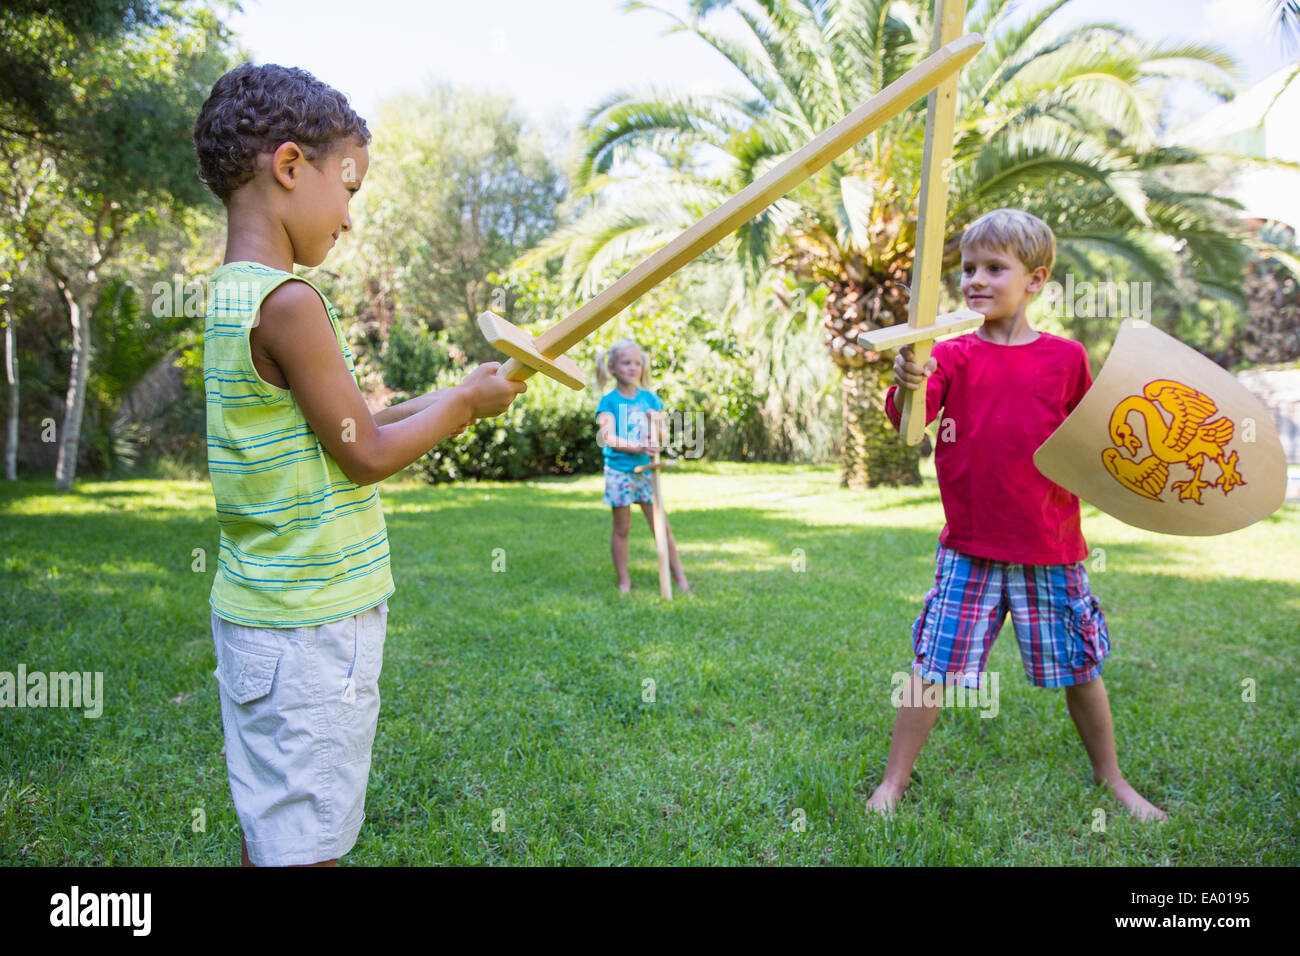 Three children in garden playing with toy swords Stock Photo